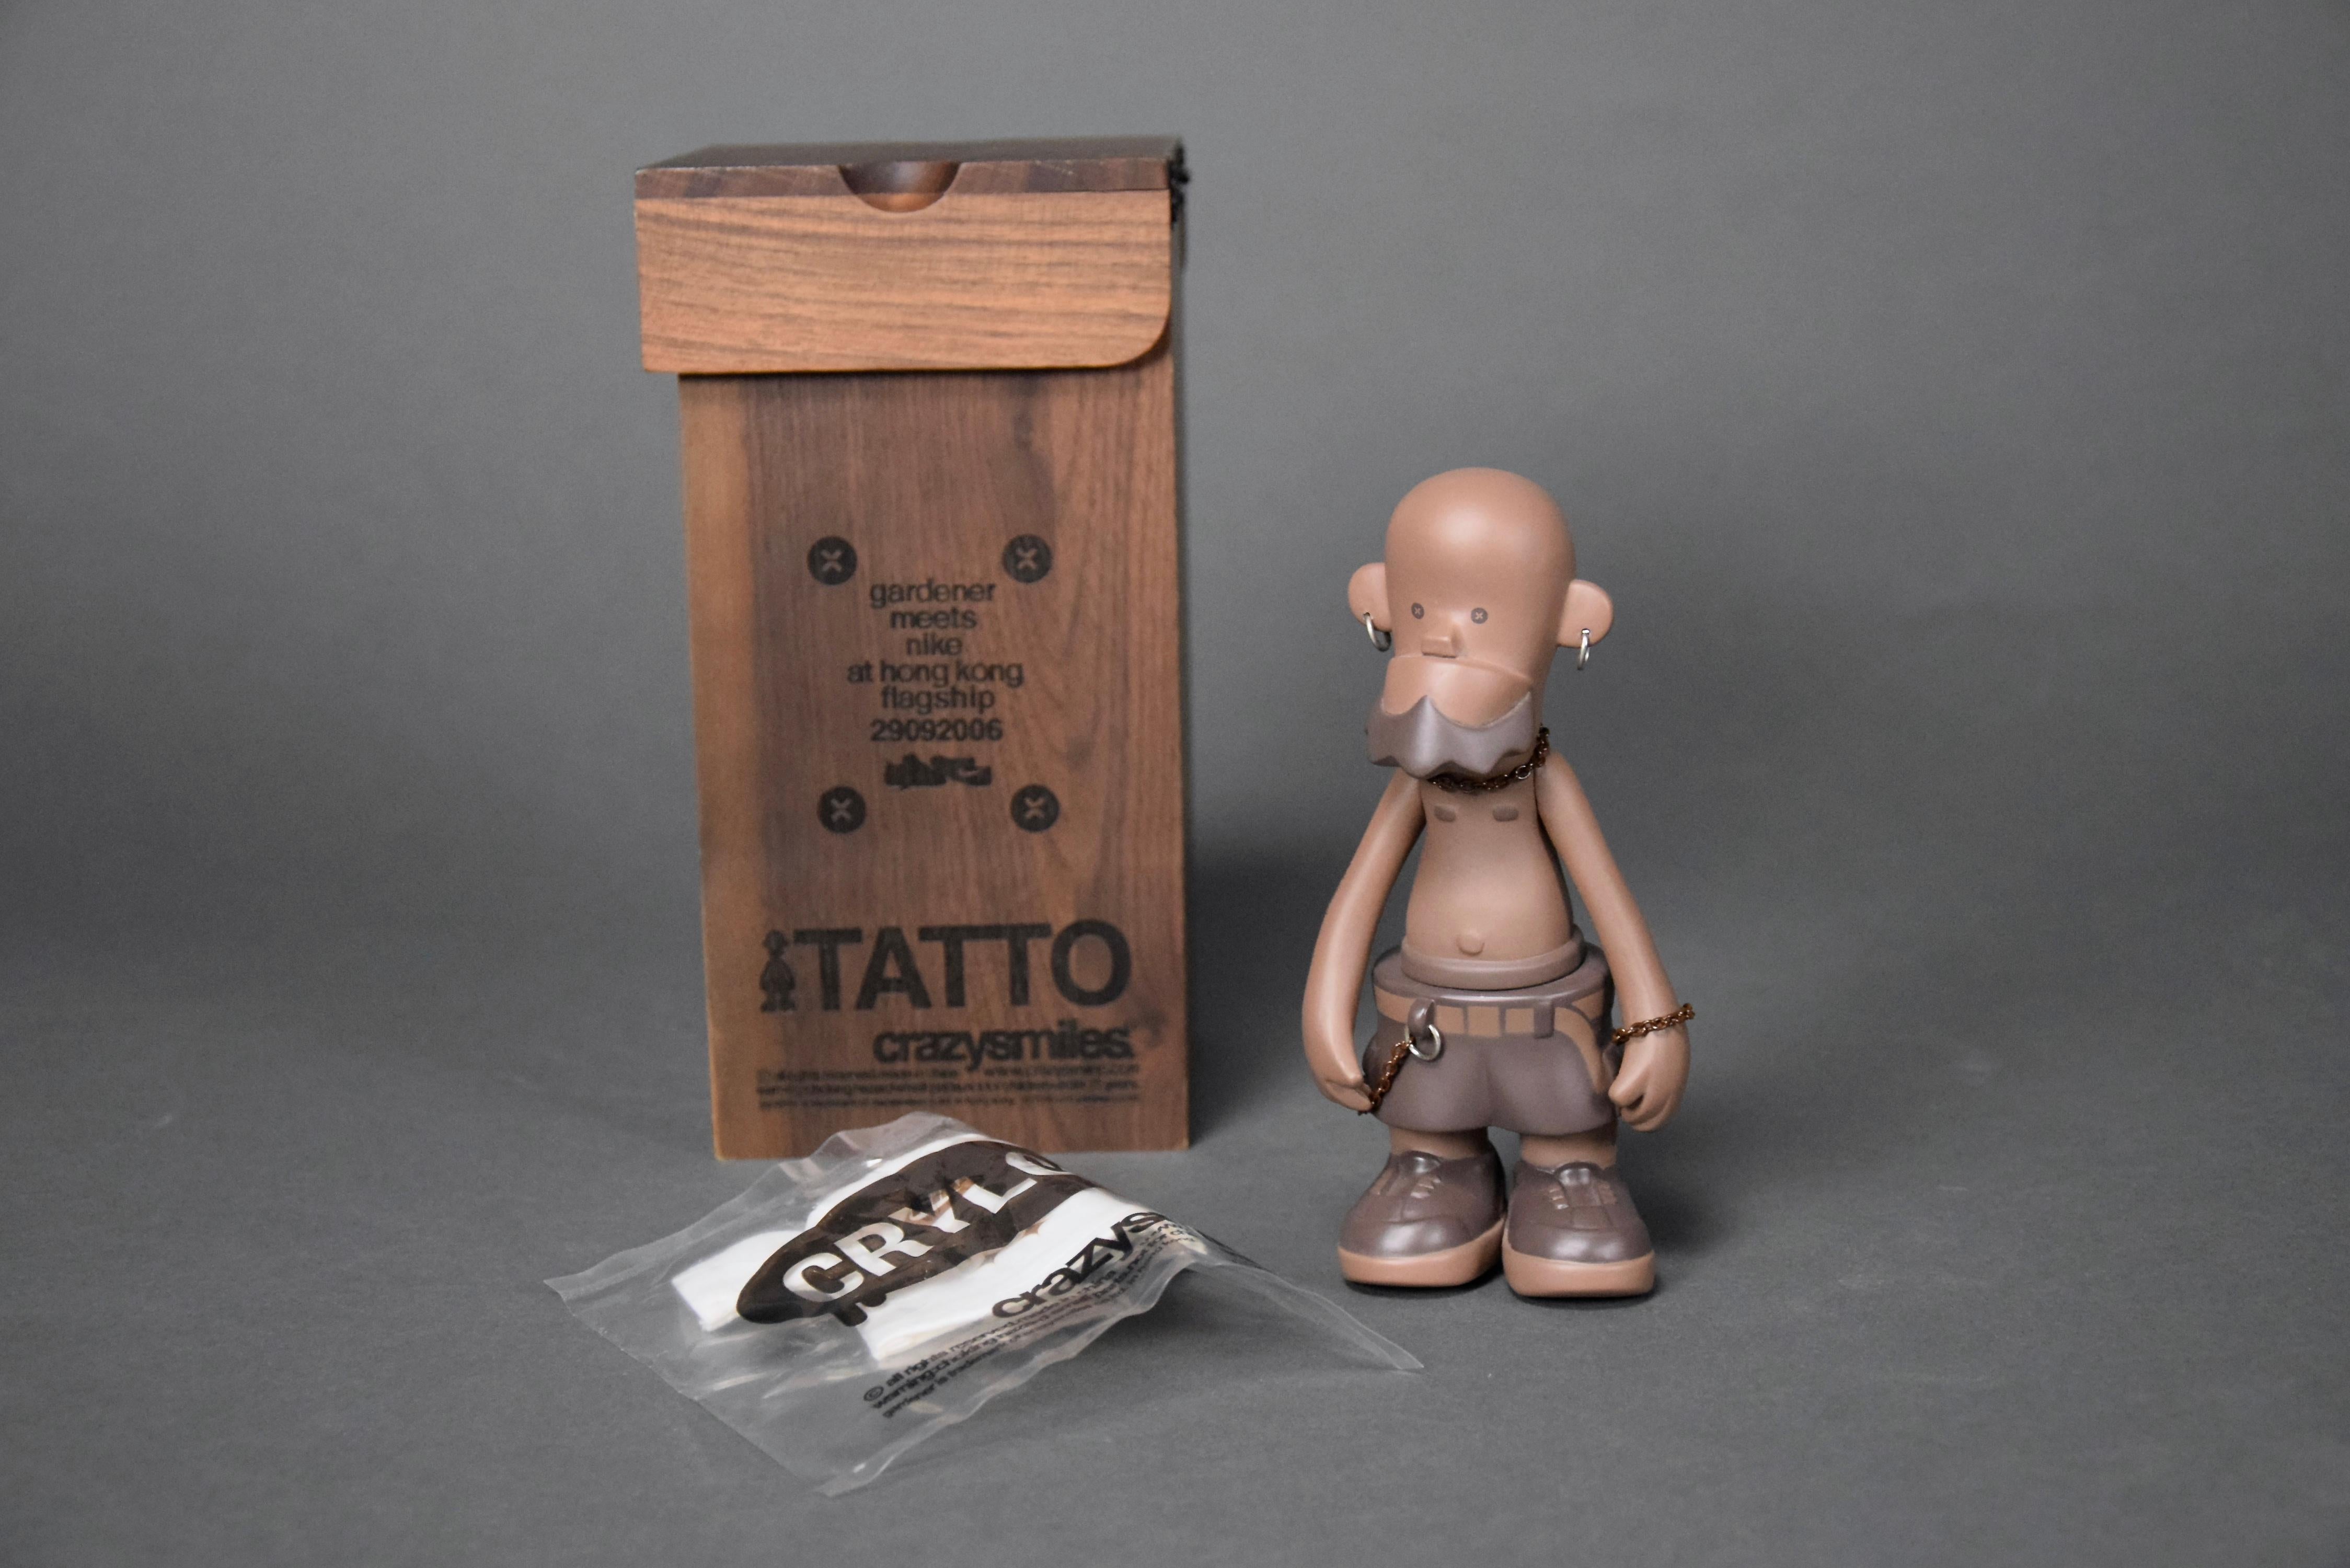 Tatto limited edition Gardener meets Nike 2006 Art Toy in beautiful laser engraved wooden box by Michael Lau and produced by Crazysmiles. This rare piece comes with it's original box, sealed figure and T-shirt. All in great condition. Tatto has